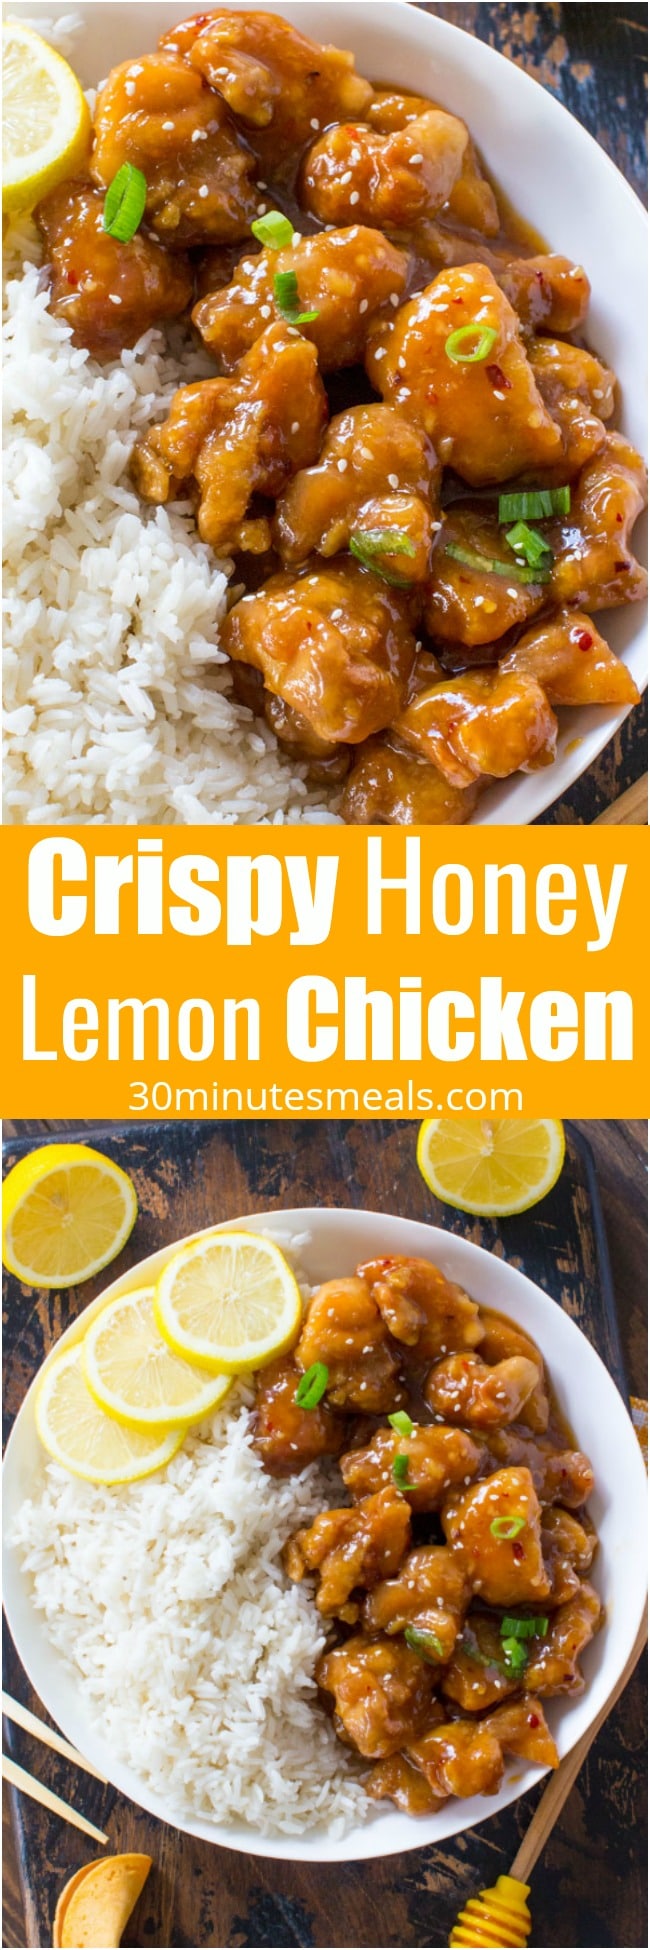 Chinese Crispy Honey Lemon Chicken is a restaurant quality meal, made easy at home in just 30 minutes! Crispy, sticky and full of honey lemon flavor.